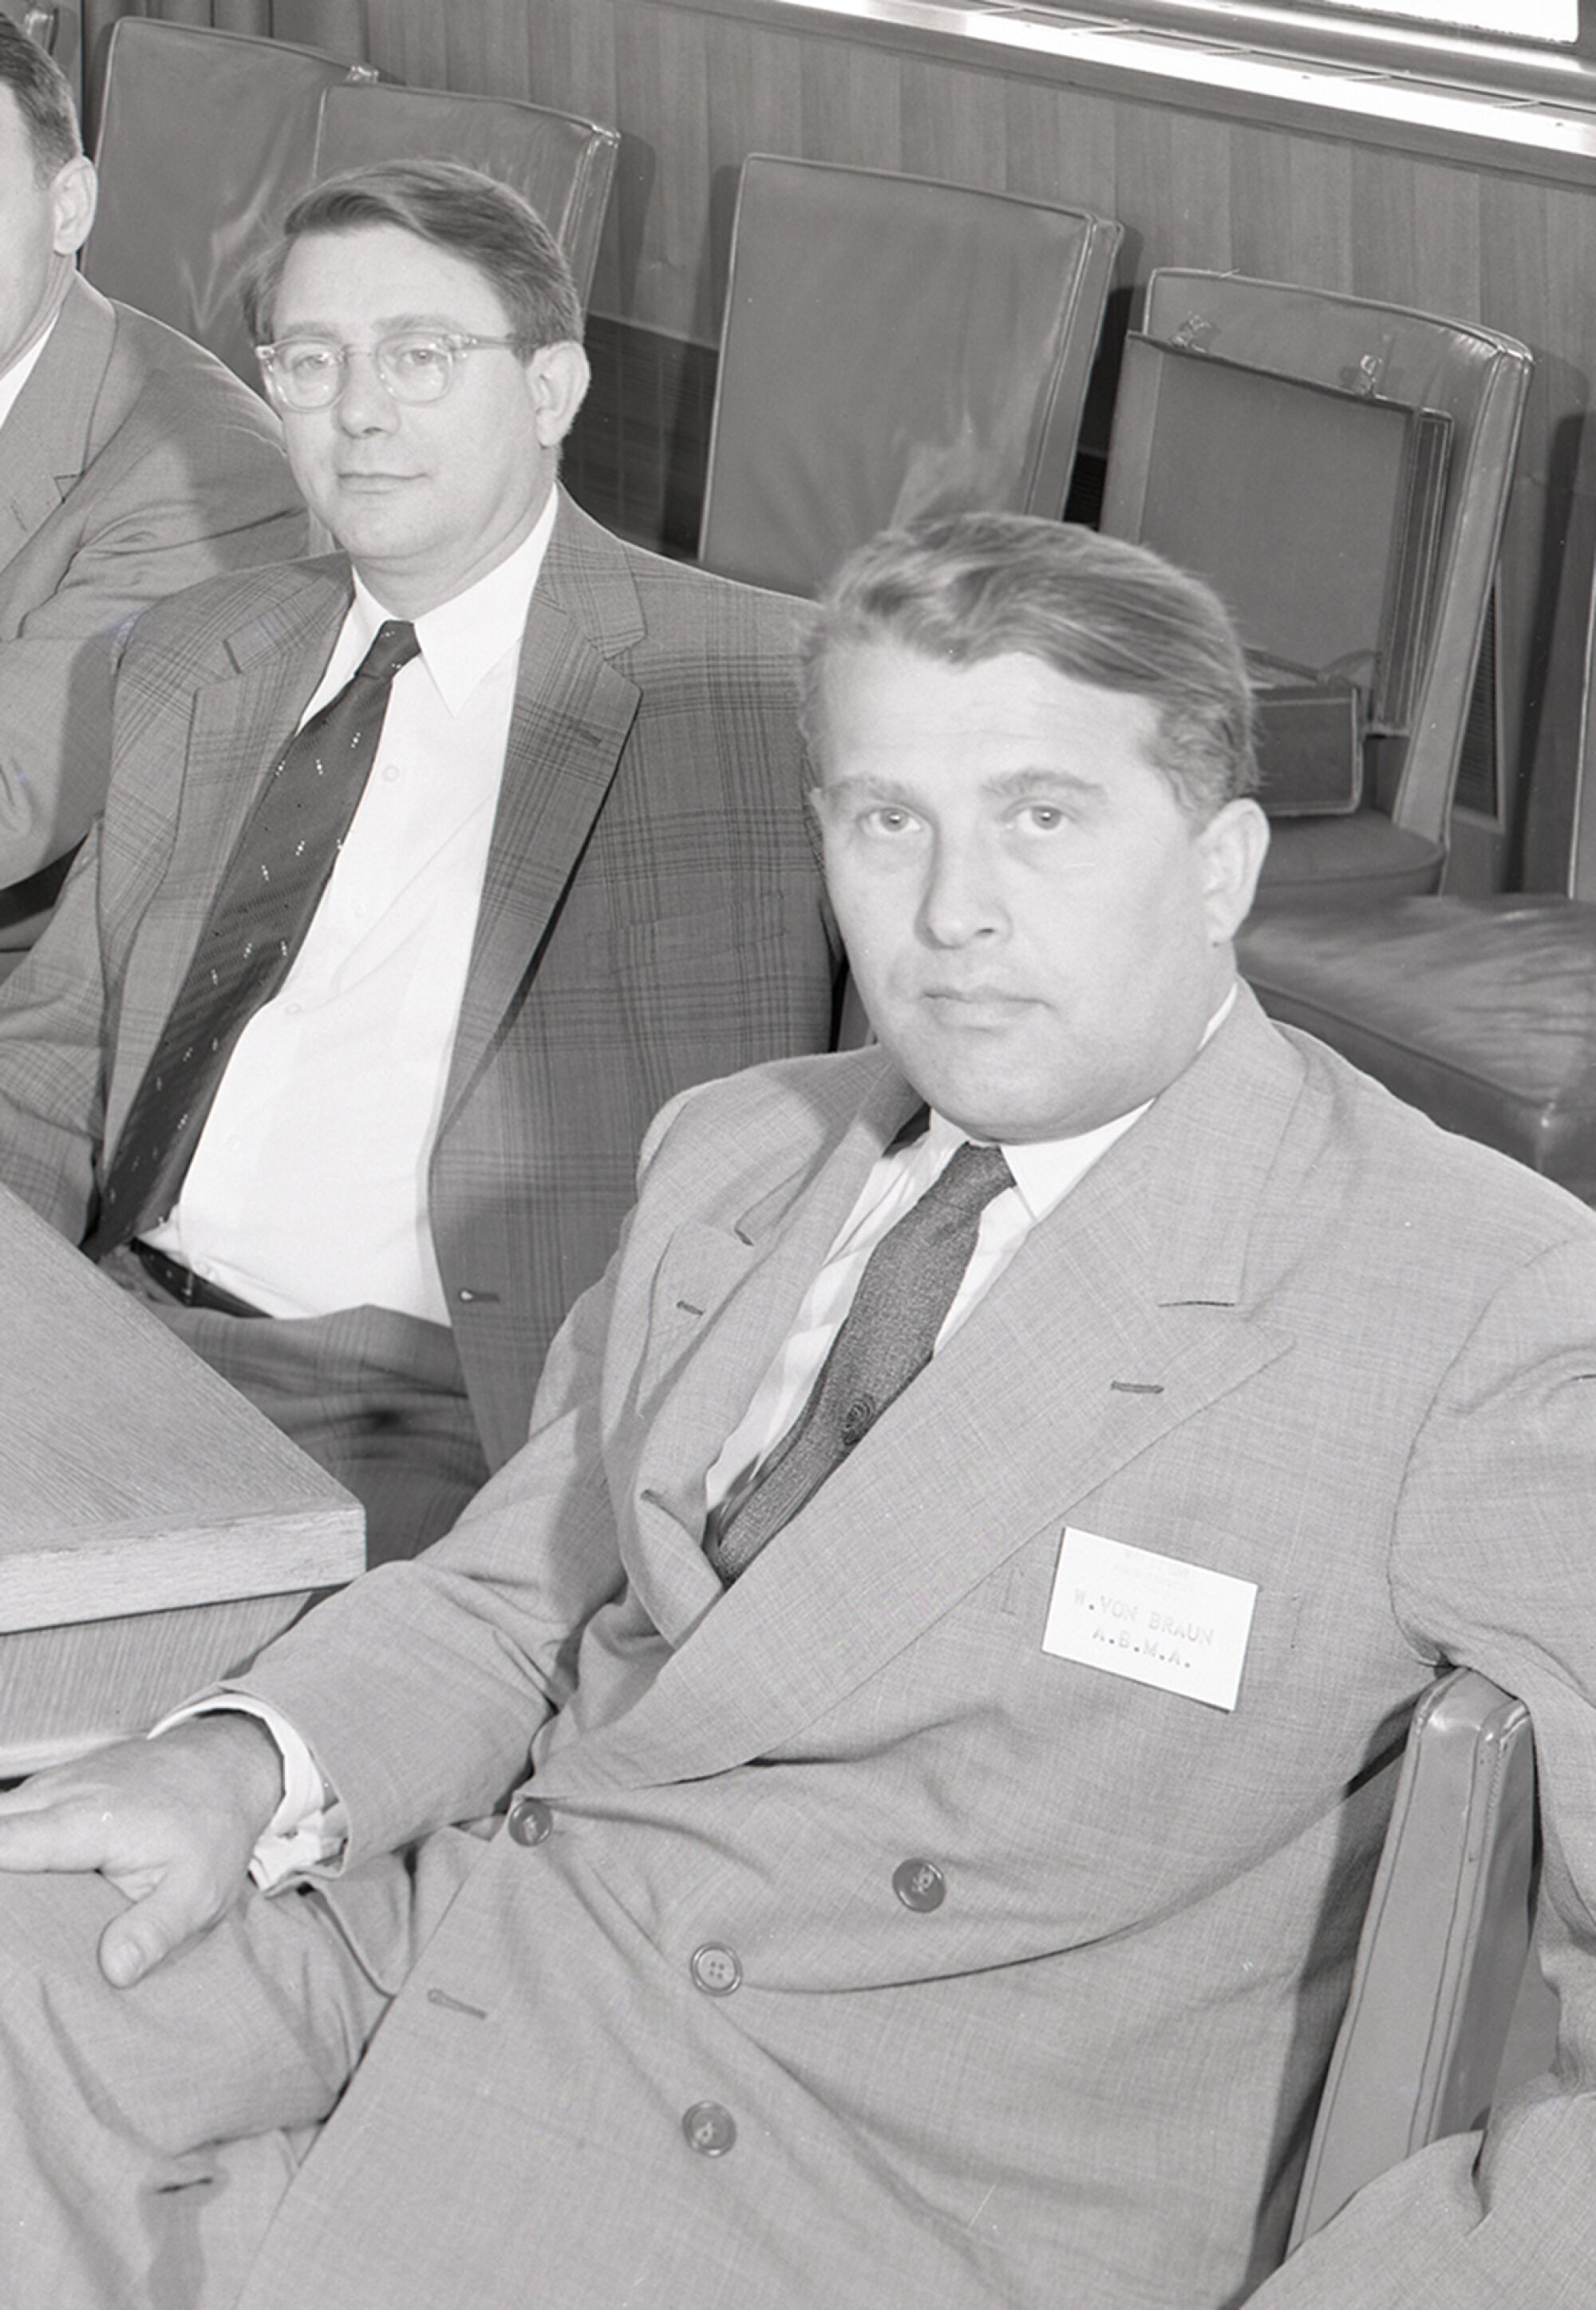 Abraham Silverstein, left, and Wernher von Braun at a space flight committee meeting in 1958 at the Lewis Research Center in Cleveland.